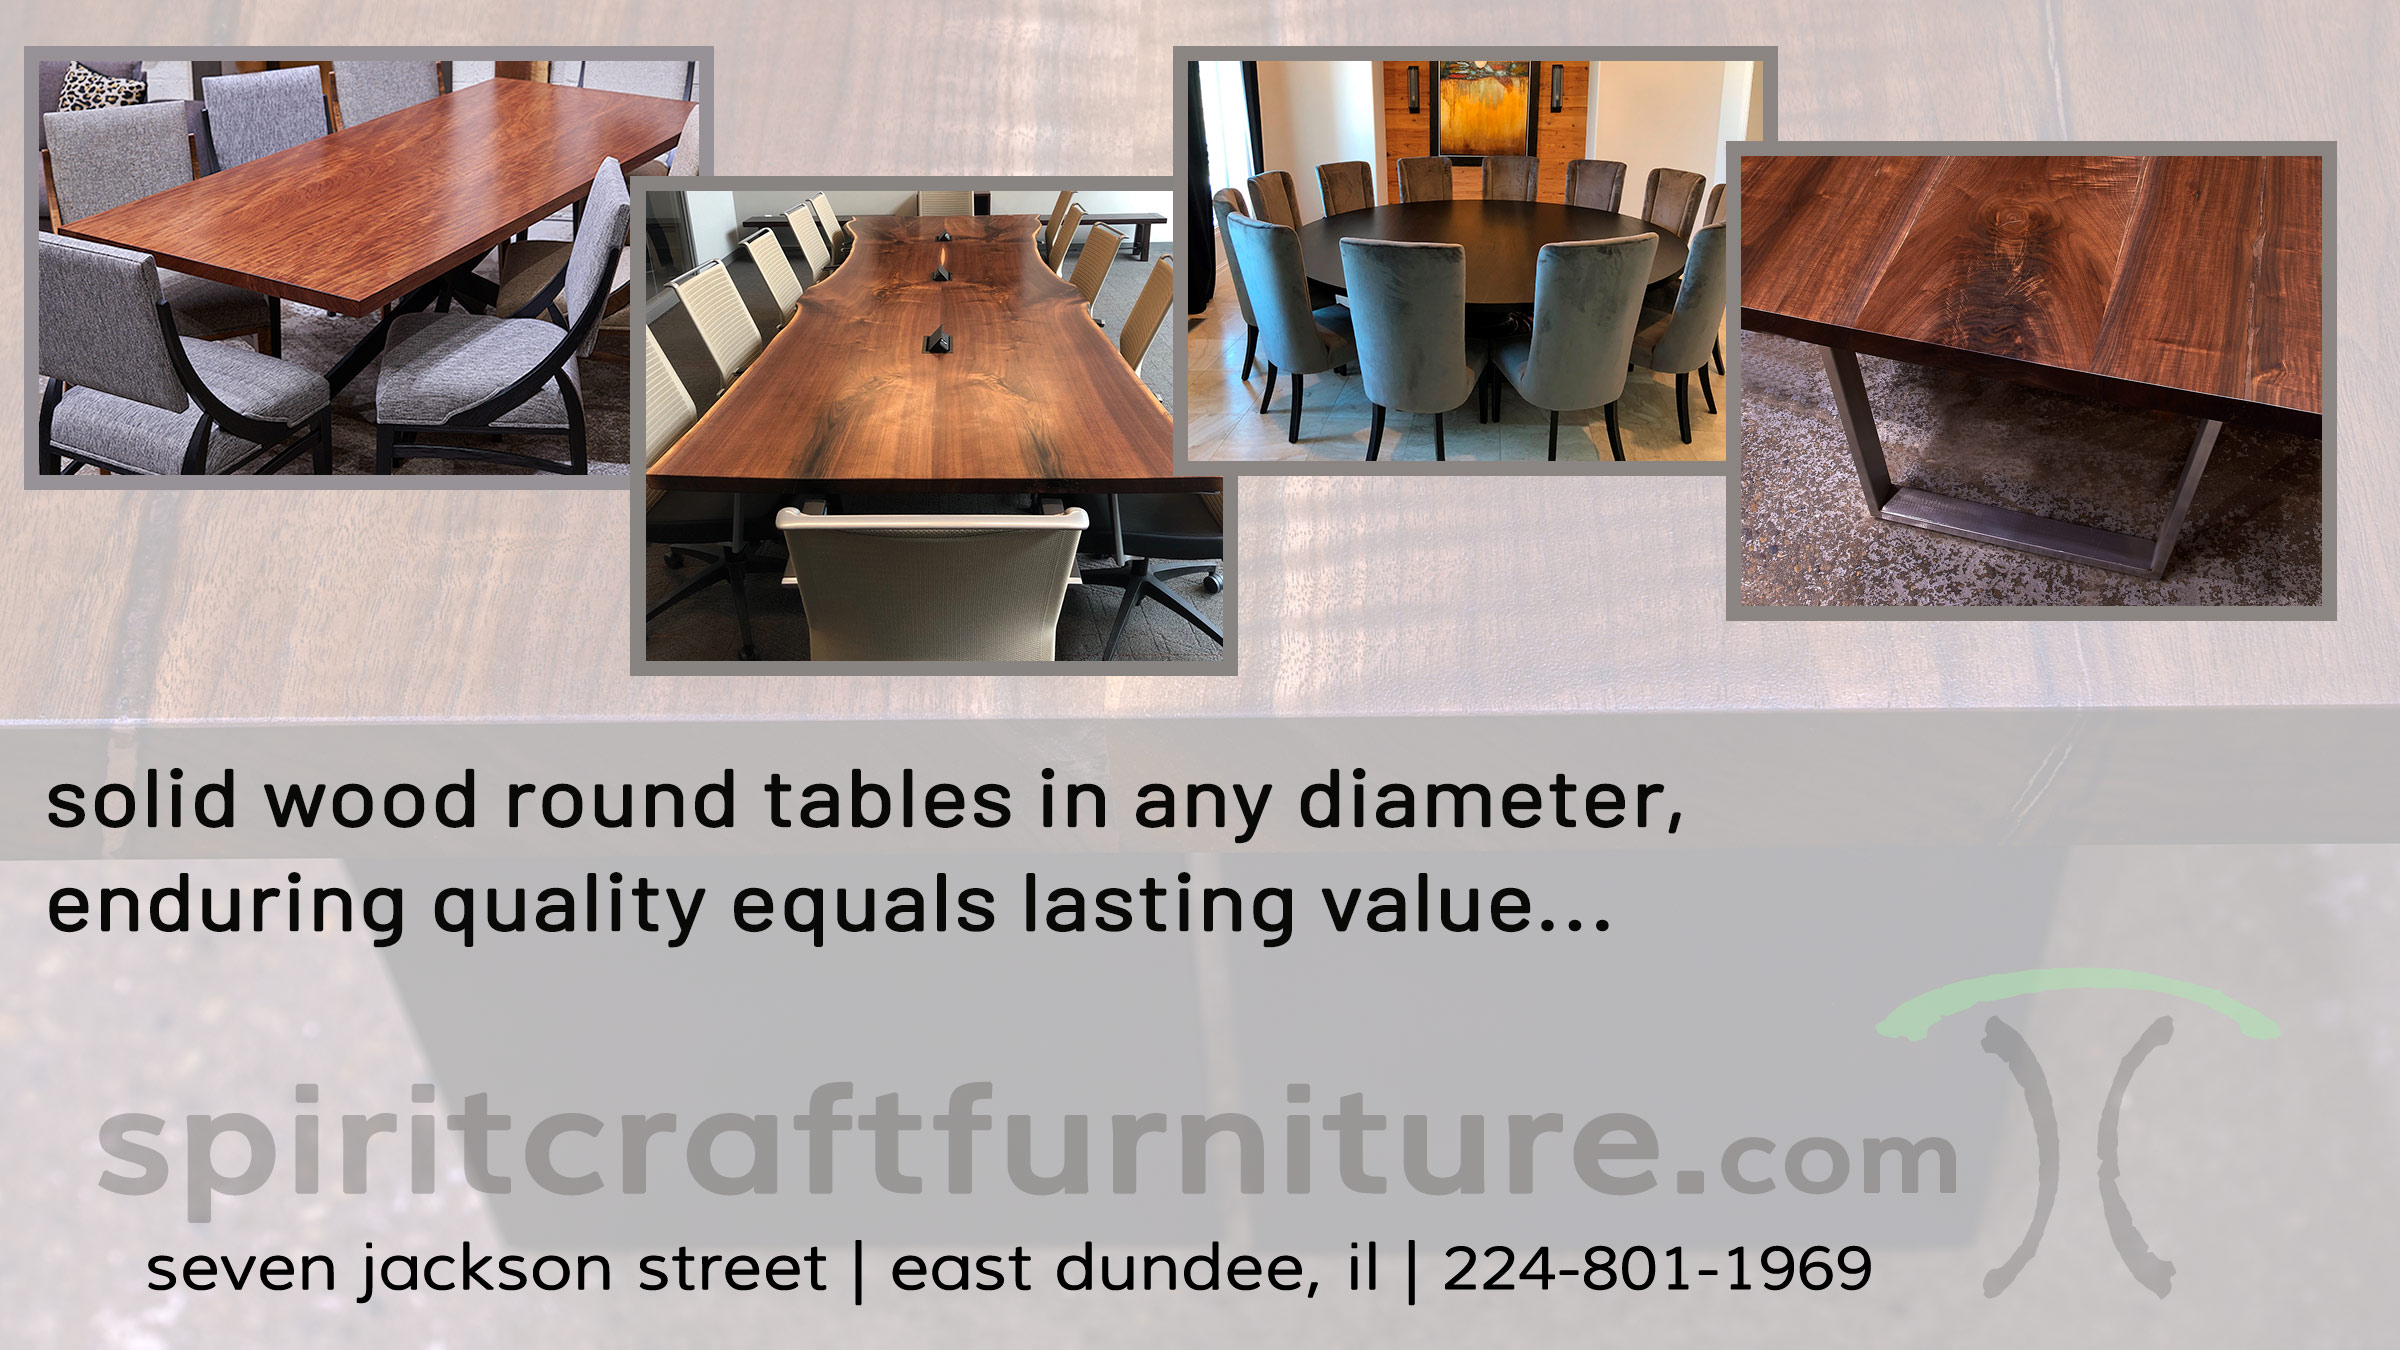 Spiritcraft Furniture Video | Solid Wood Tables and Table Tops